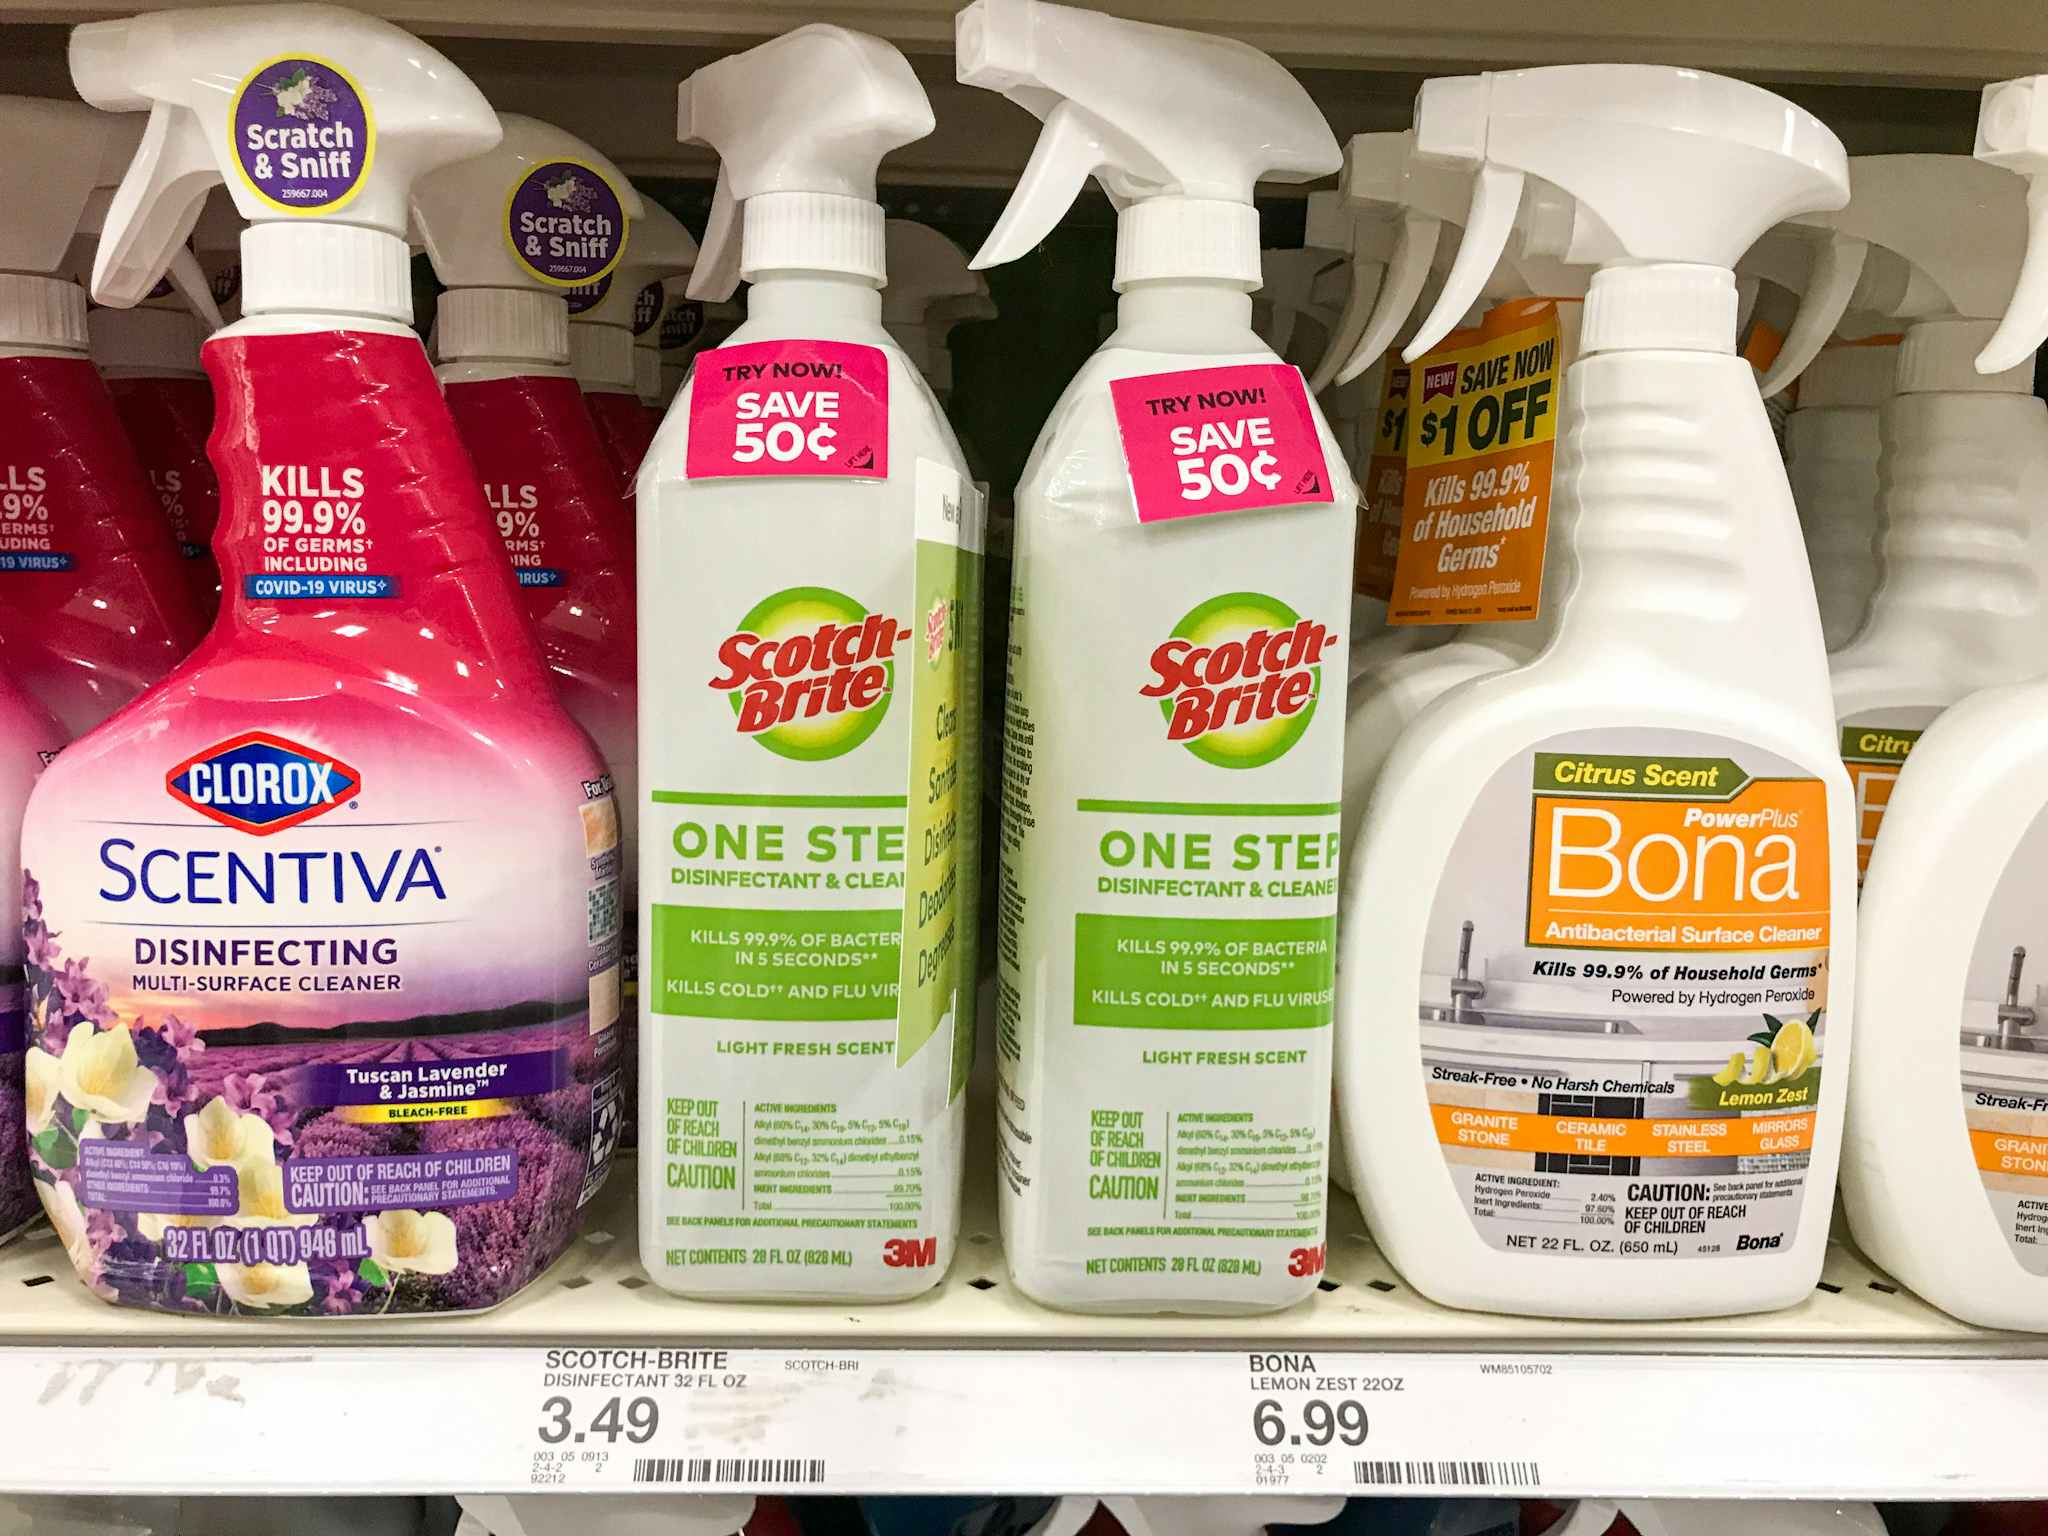  Scotch-Brite disinfectant and cleaner on a target shelf